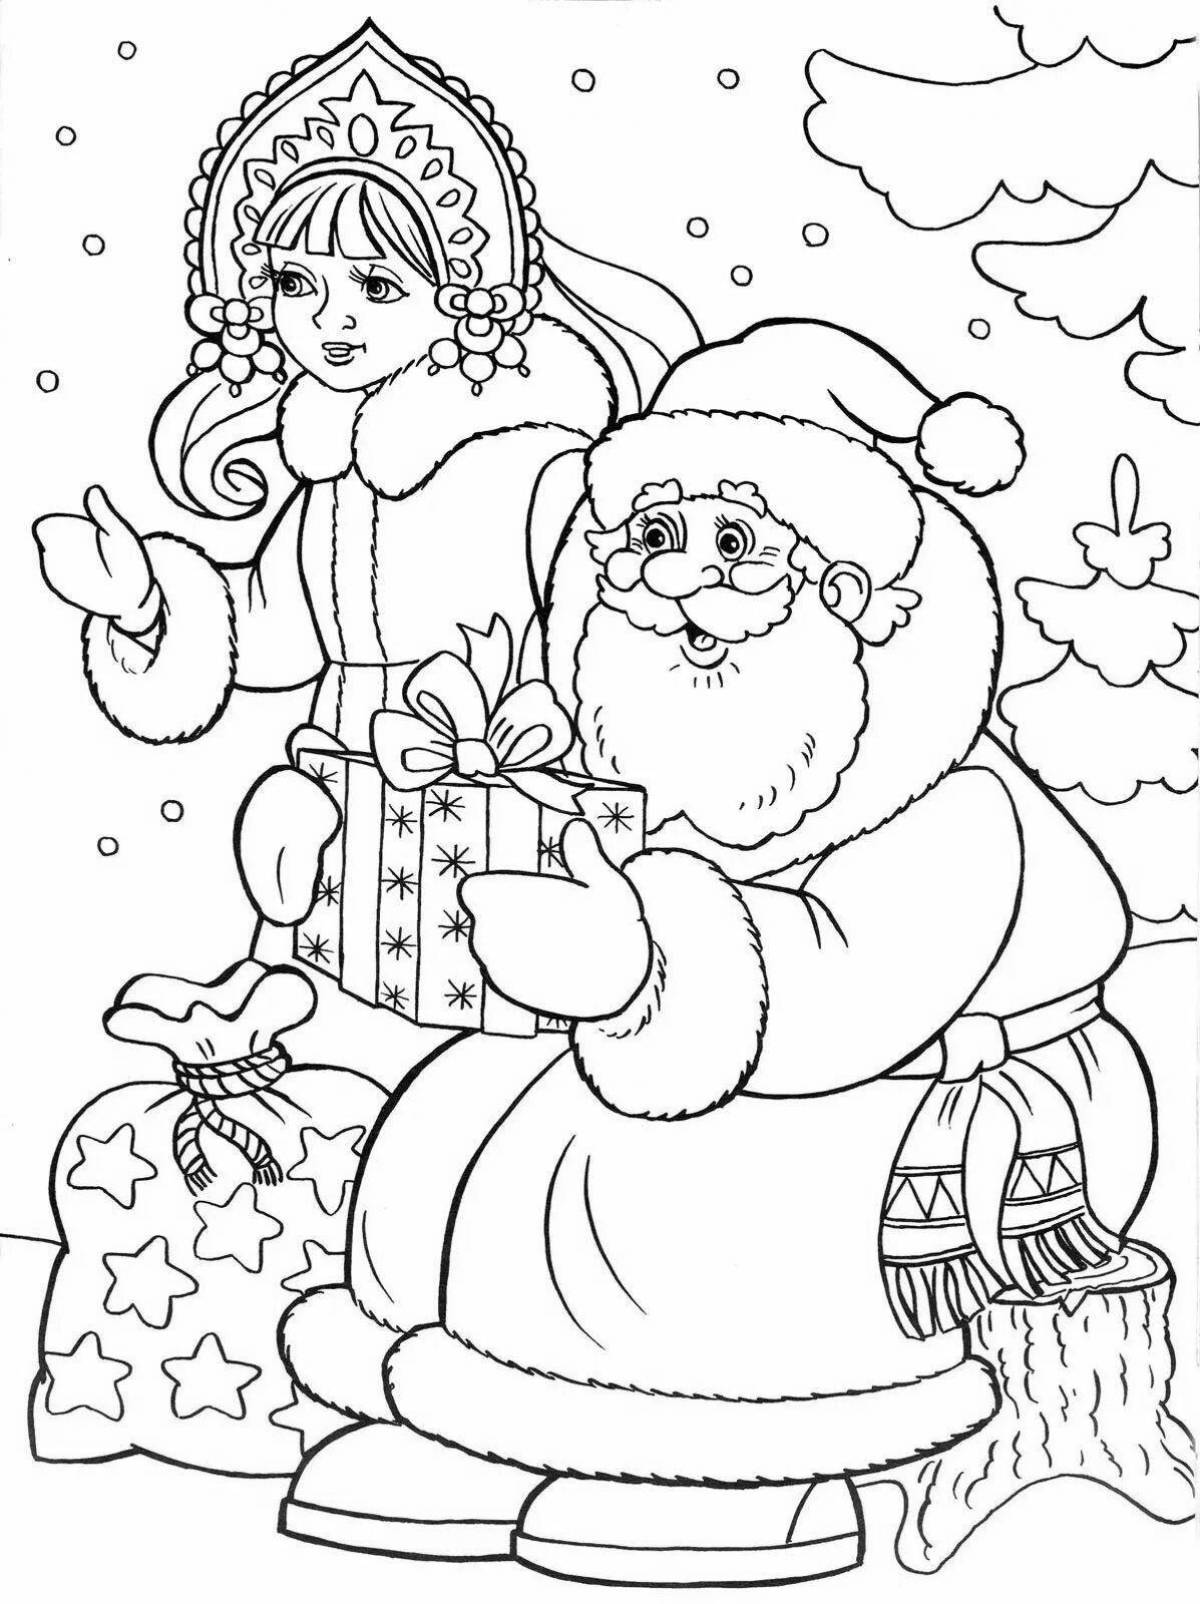 Cheerful santa claus coloring for girls